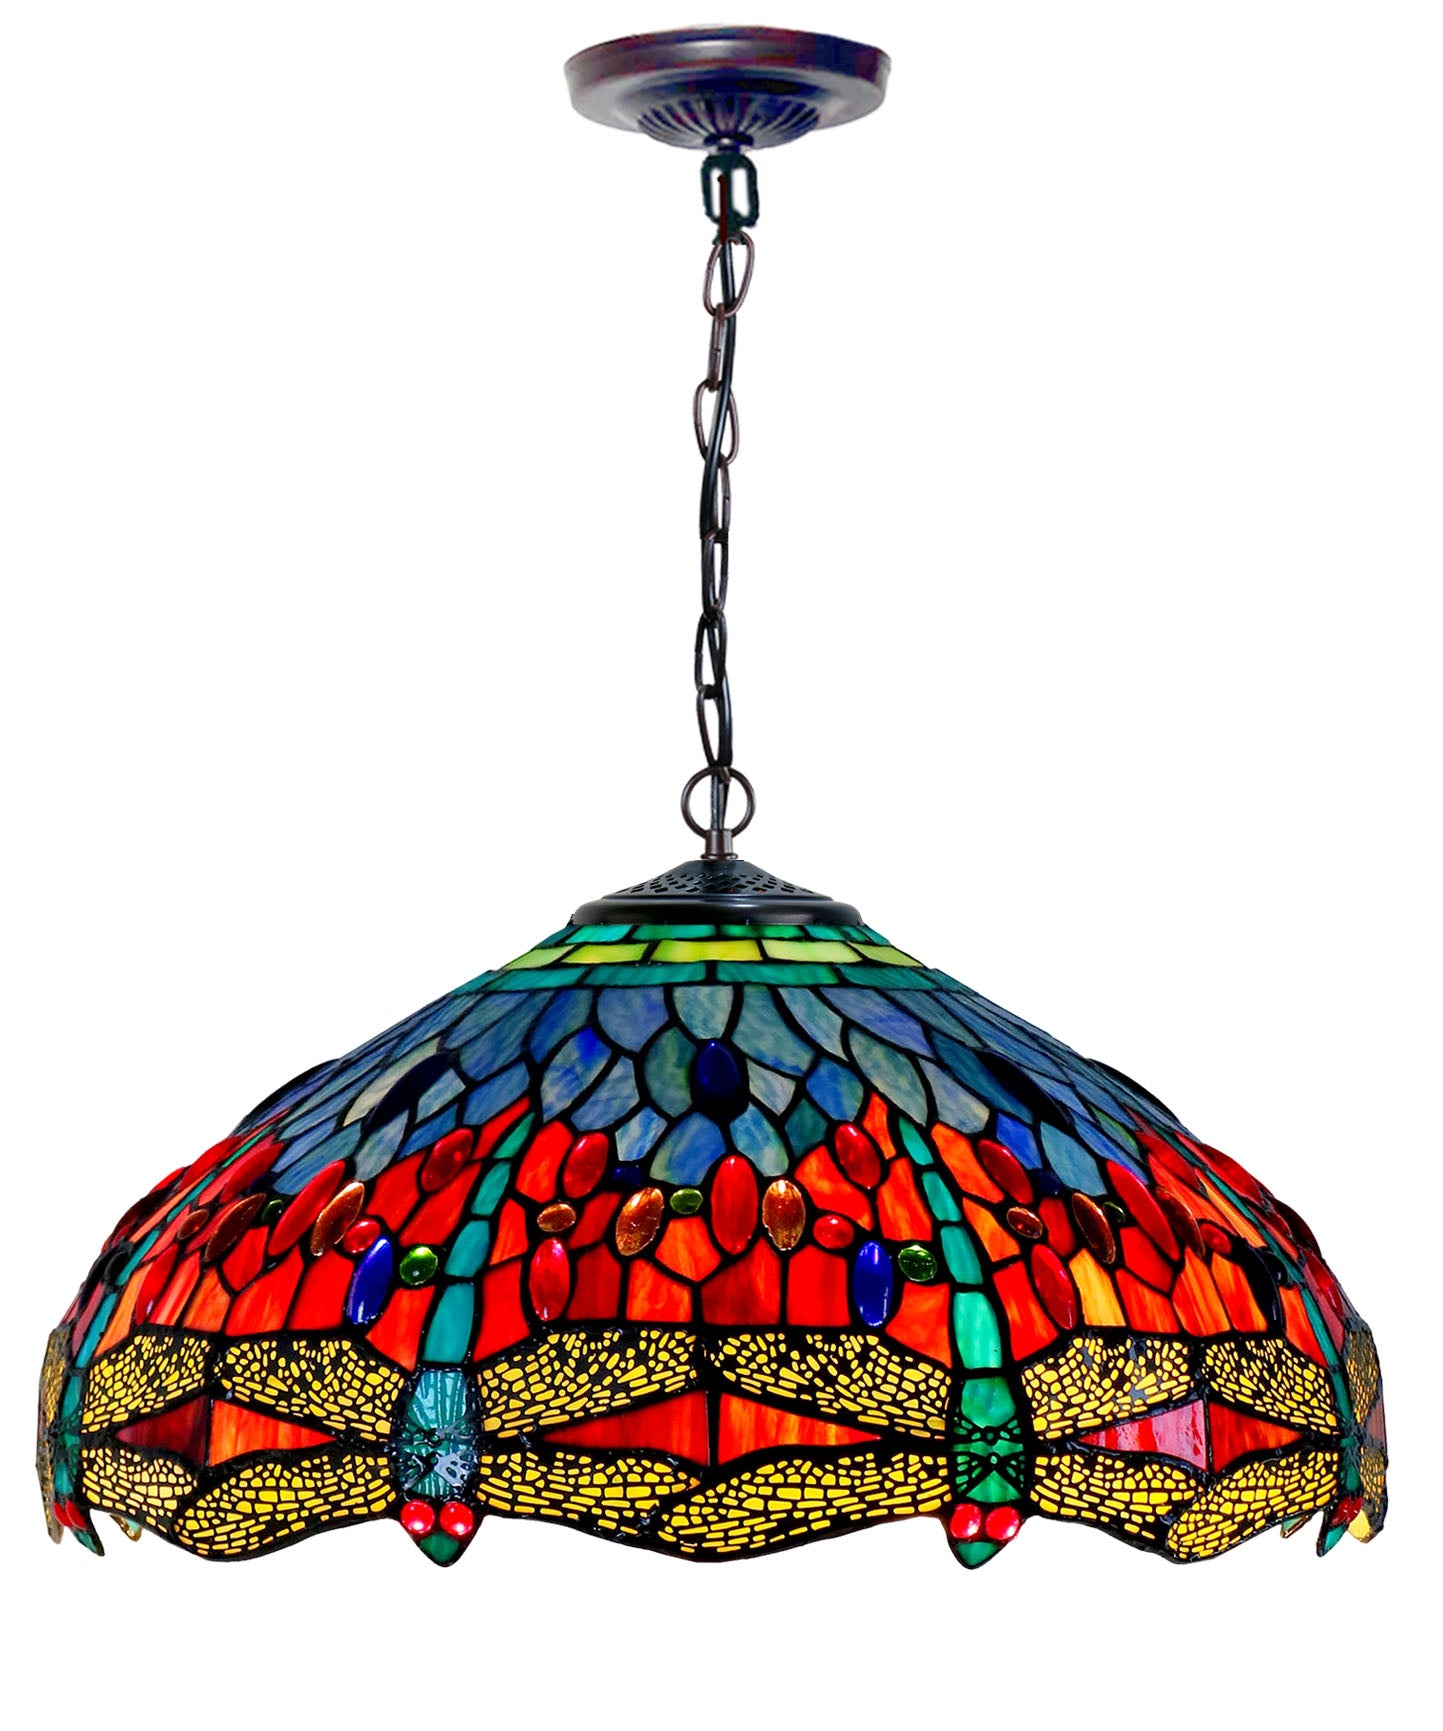 Huge 18" Red Blue Dragonfly Style Stained Glass Tiffany Hanging Light